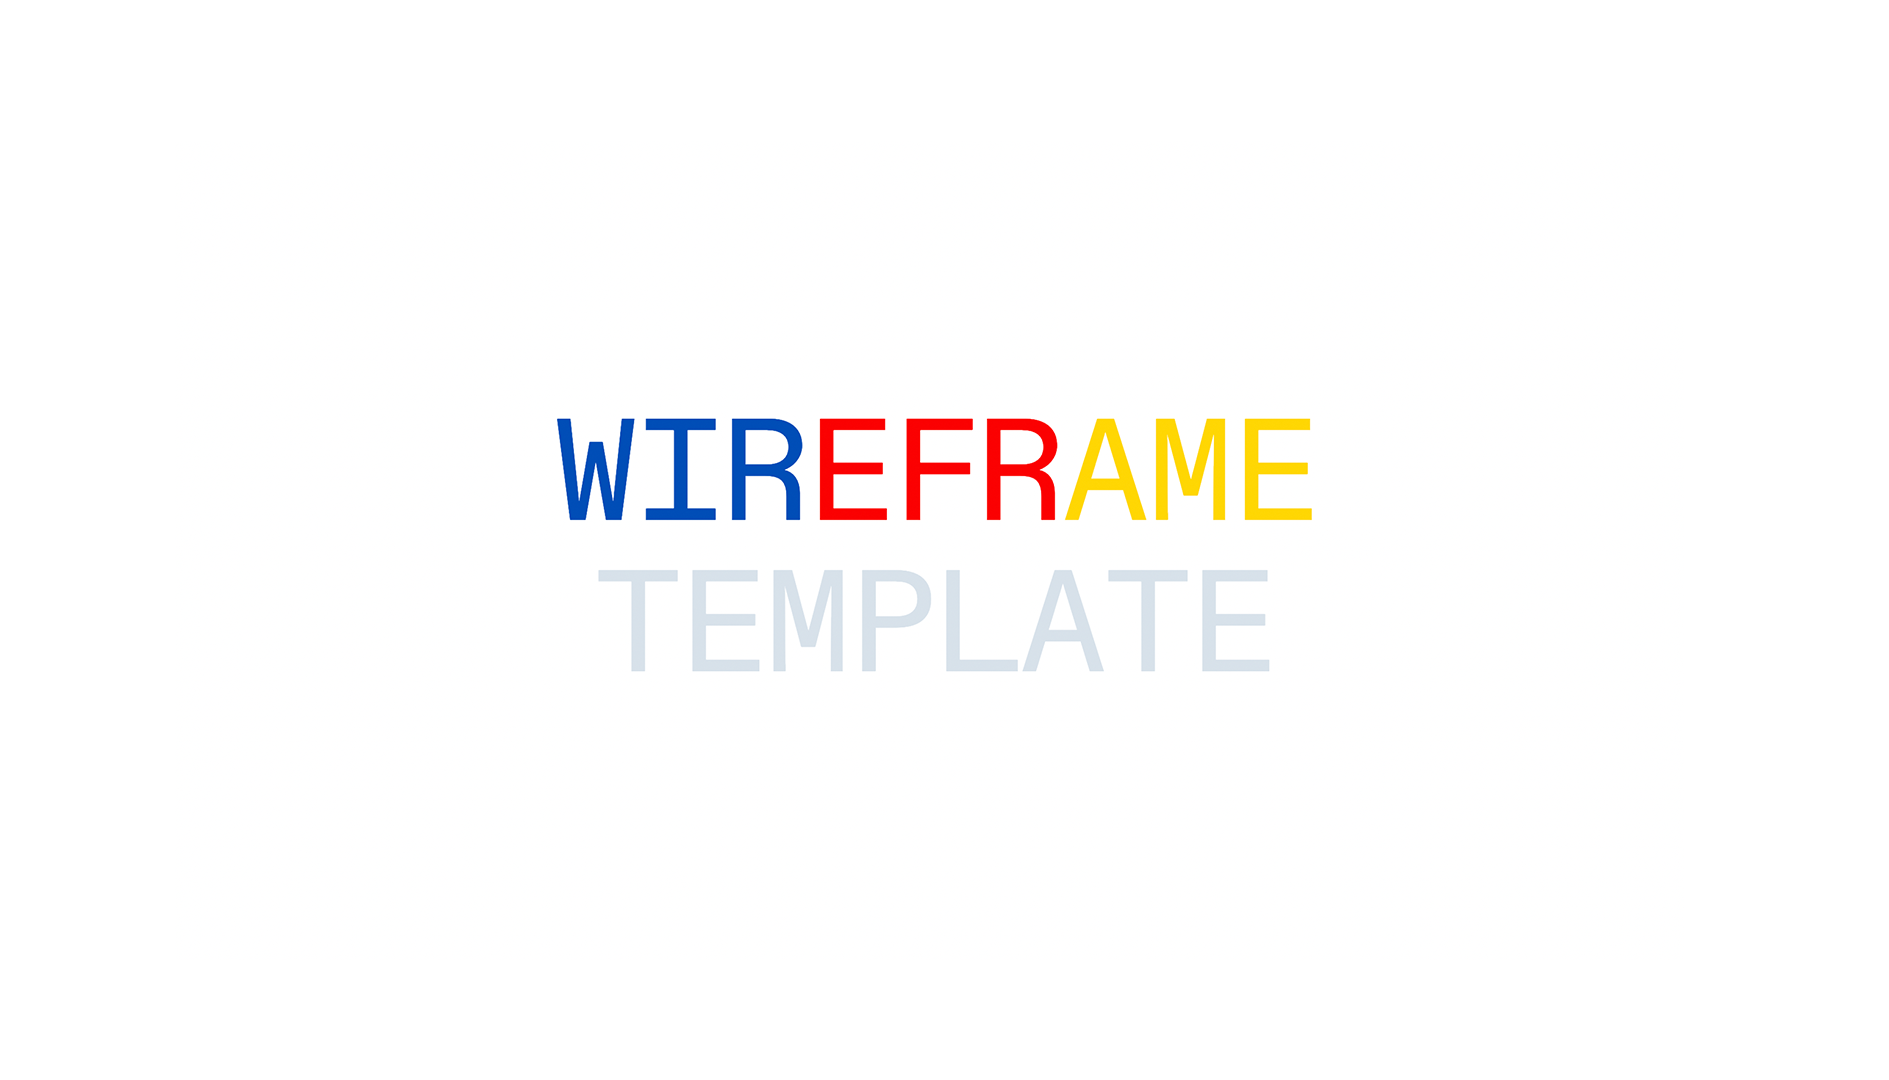 Wireframe Template - Title